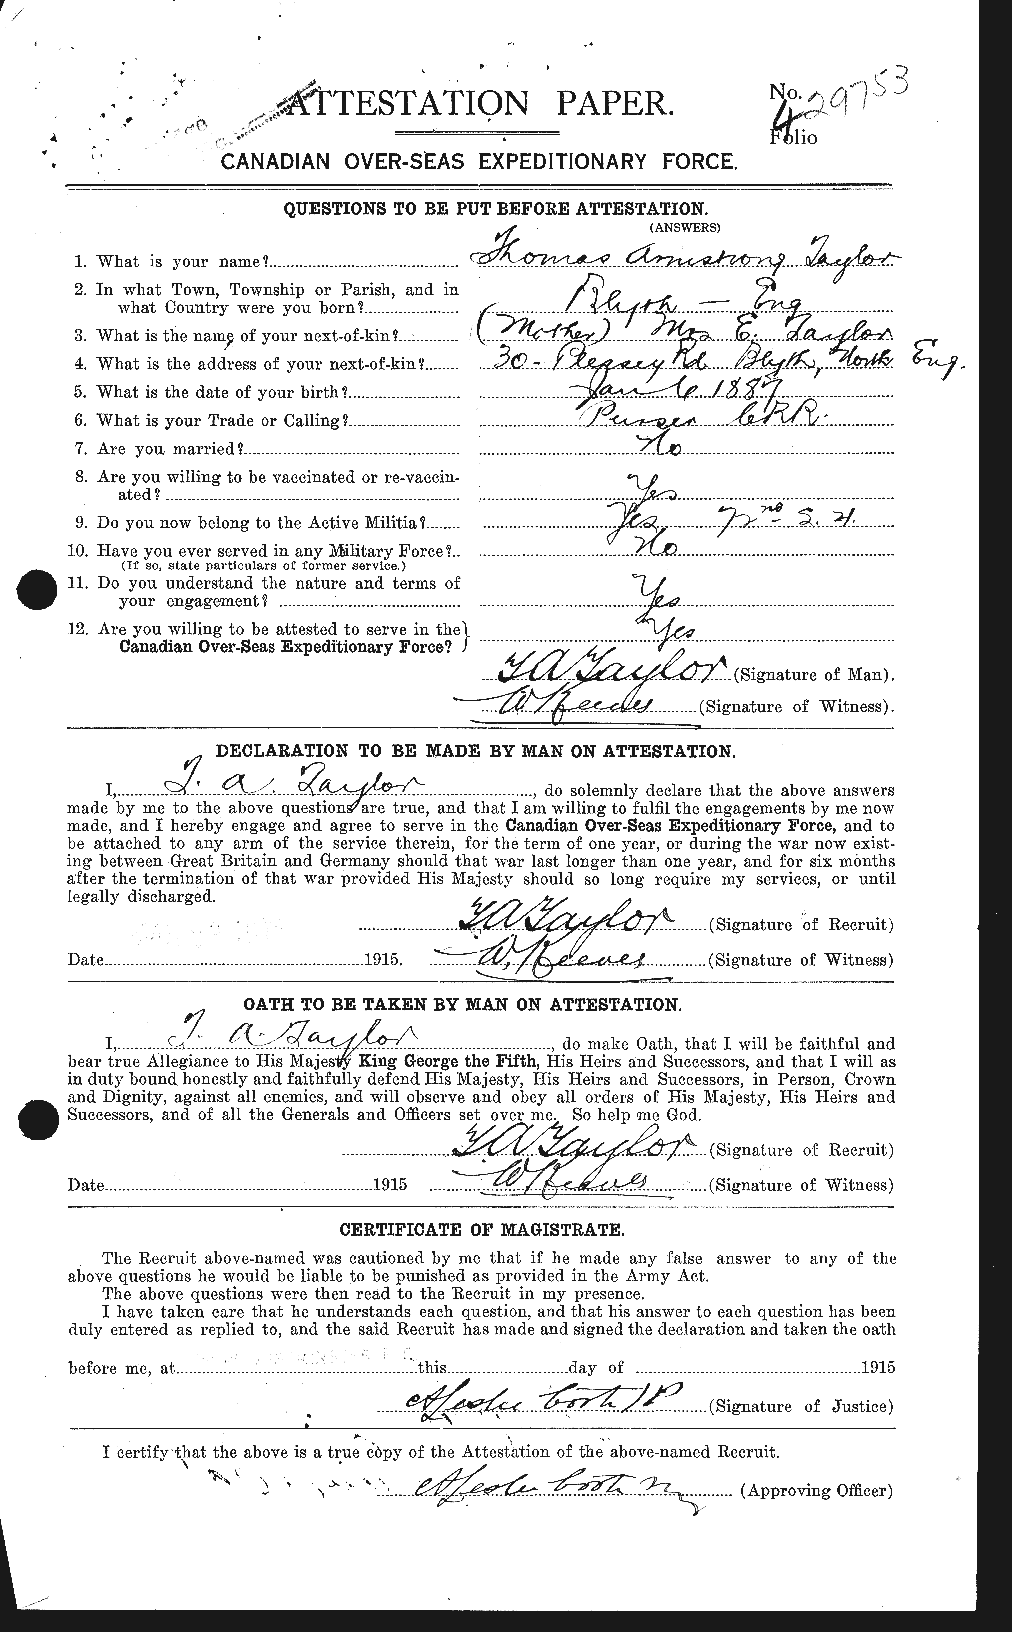 Personnel Records of the First World War - CEF 627970a